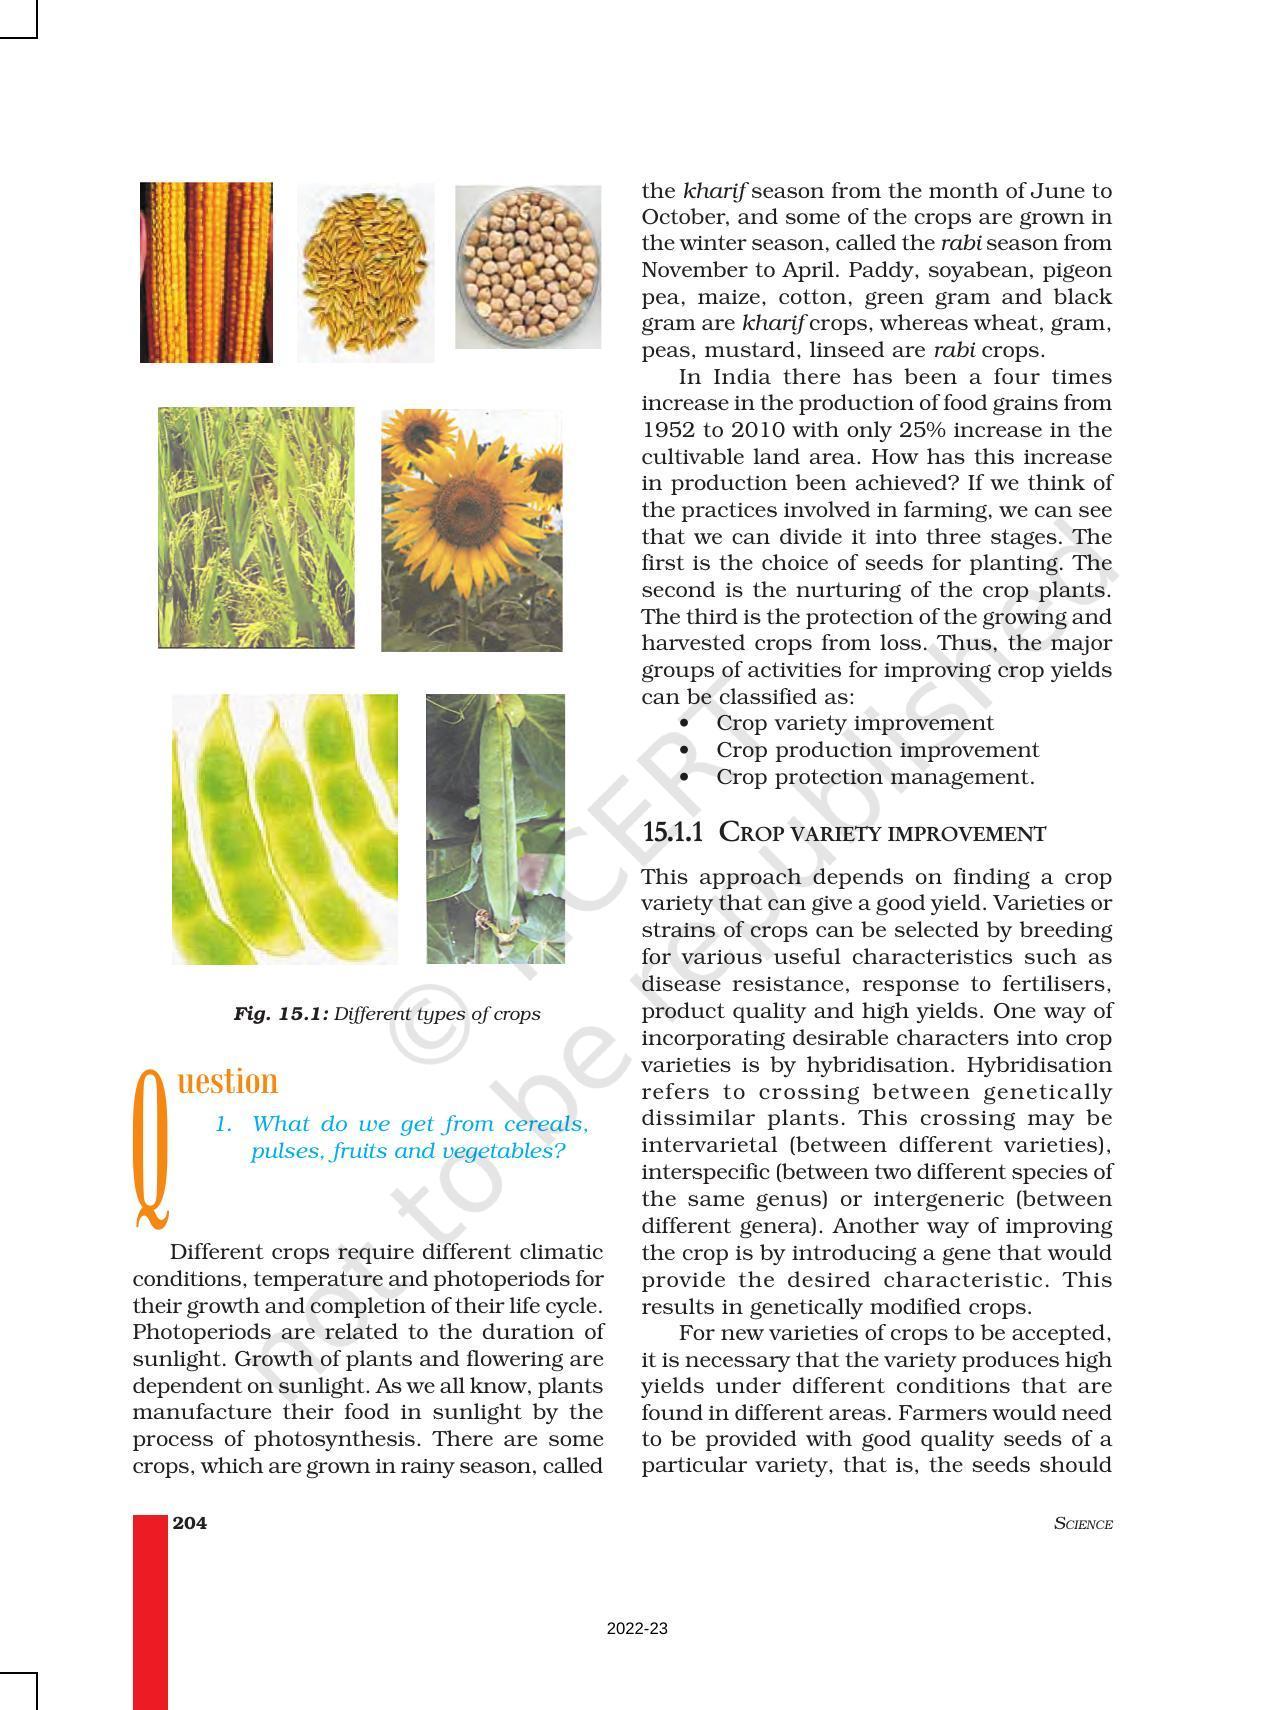 NCERT Book for Class 9 Science Chapter 15 Improvement in Food Resources - Page 2